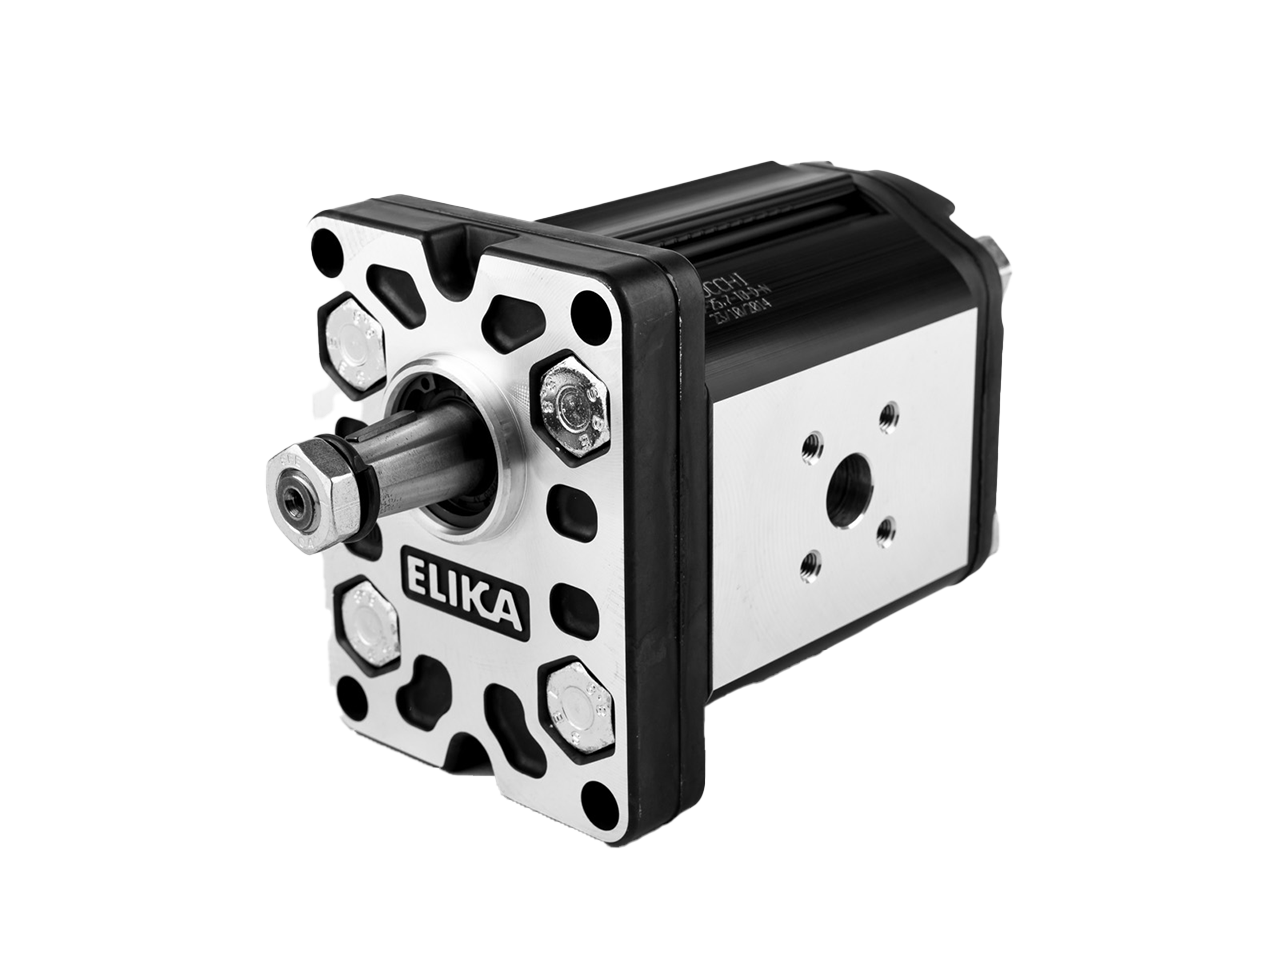 Marzocchi Helical gear pumps